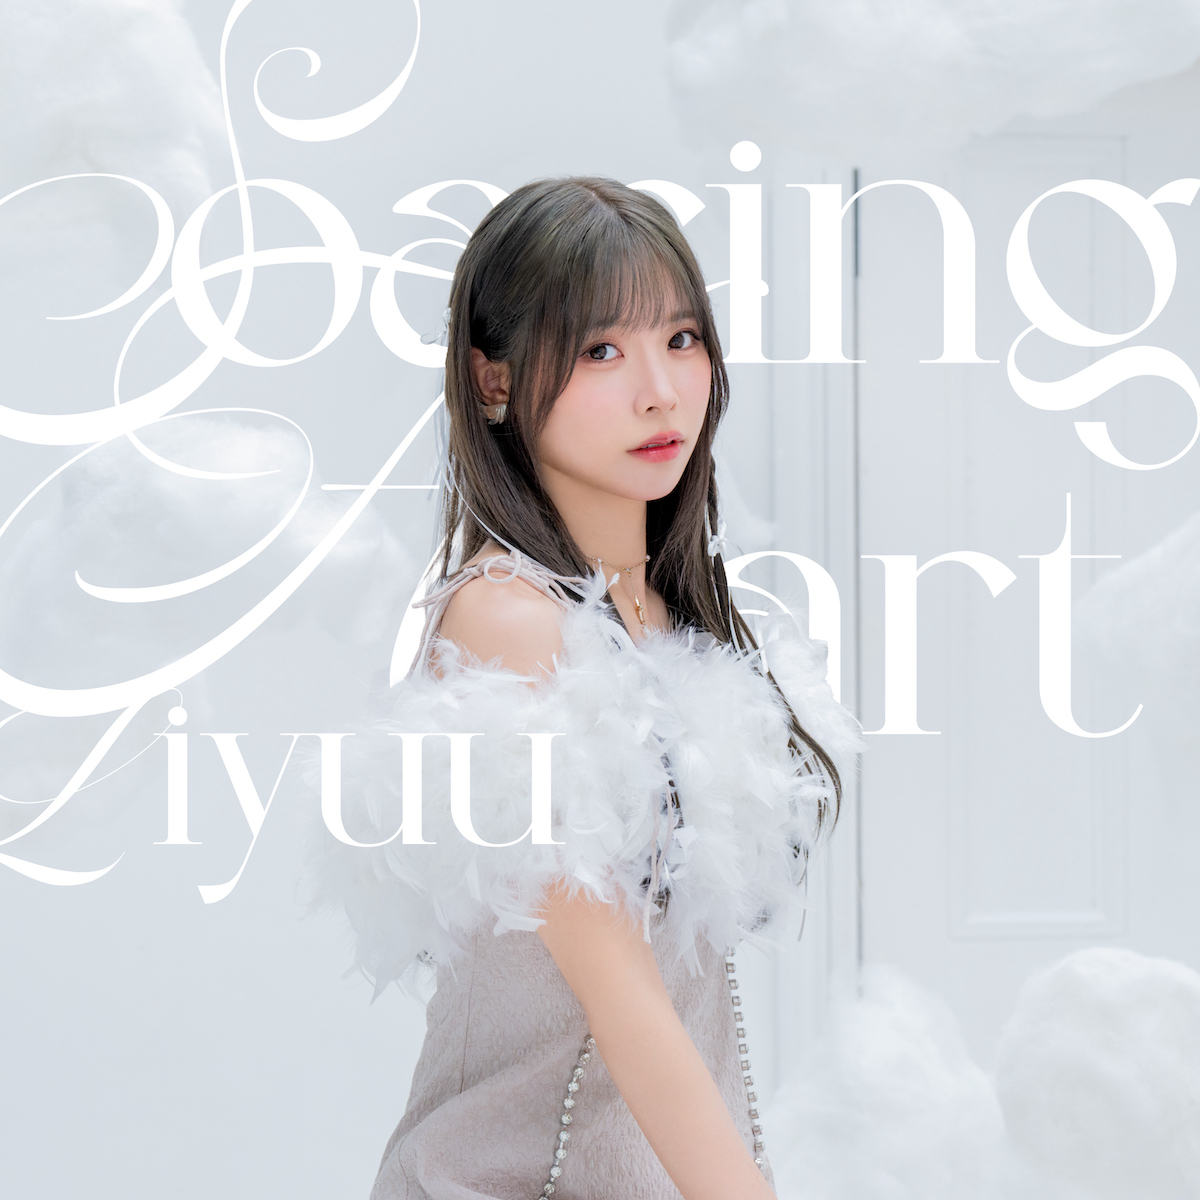 Liyuu-2nd-album-merch-scaled Sample and Music Videos Released for Liyuu’s Upcoming 2nd Album Soaring Heart!